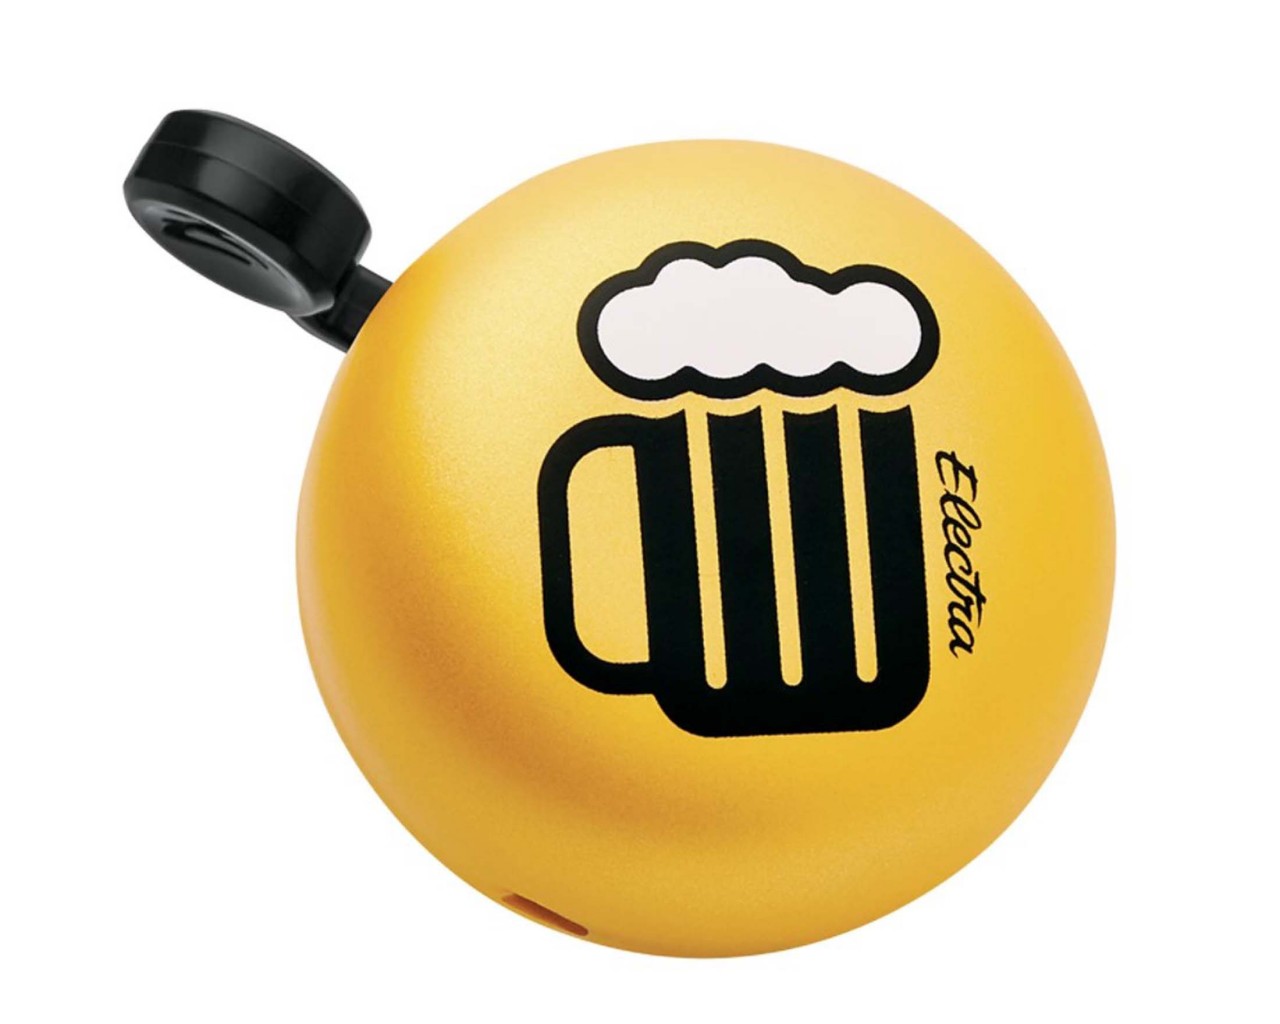 Electra Cheers Domed Ringer Bike Bell | yellow-black